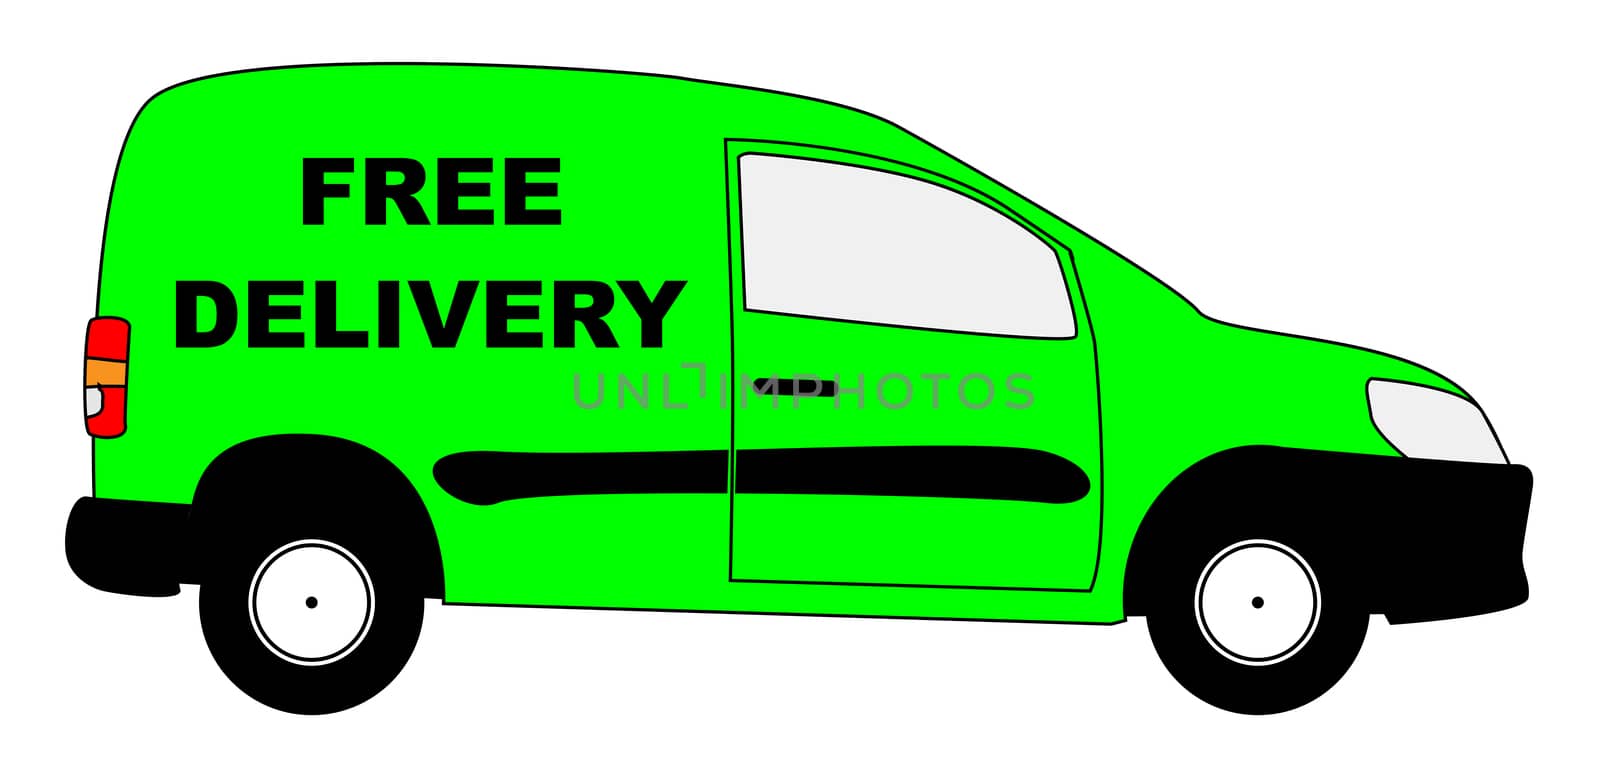 Small Delivery Van With Free Delivery Text by Bigalbaloo